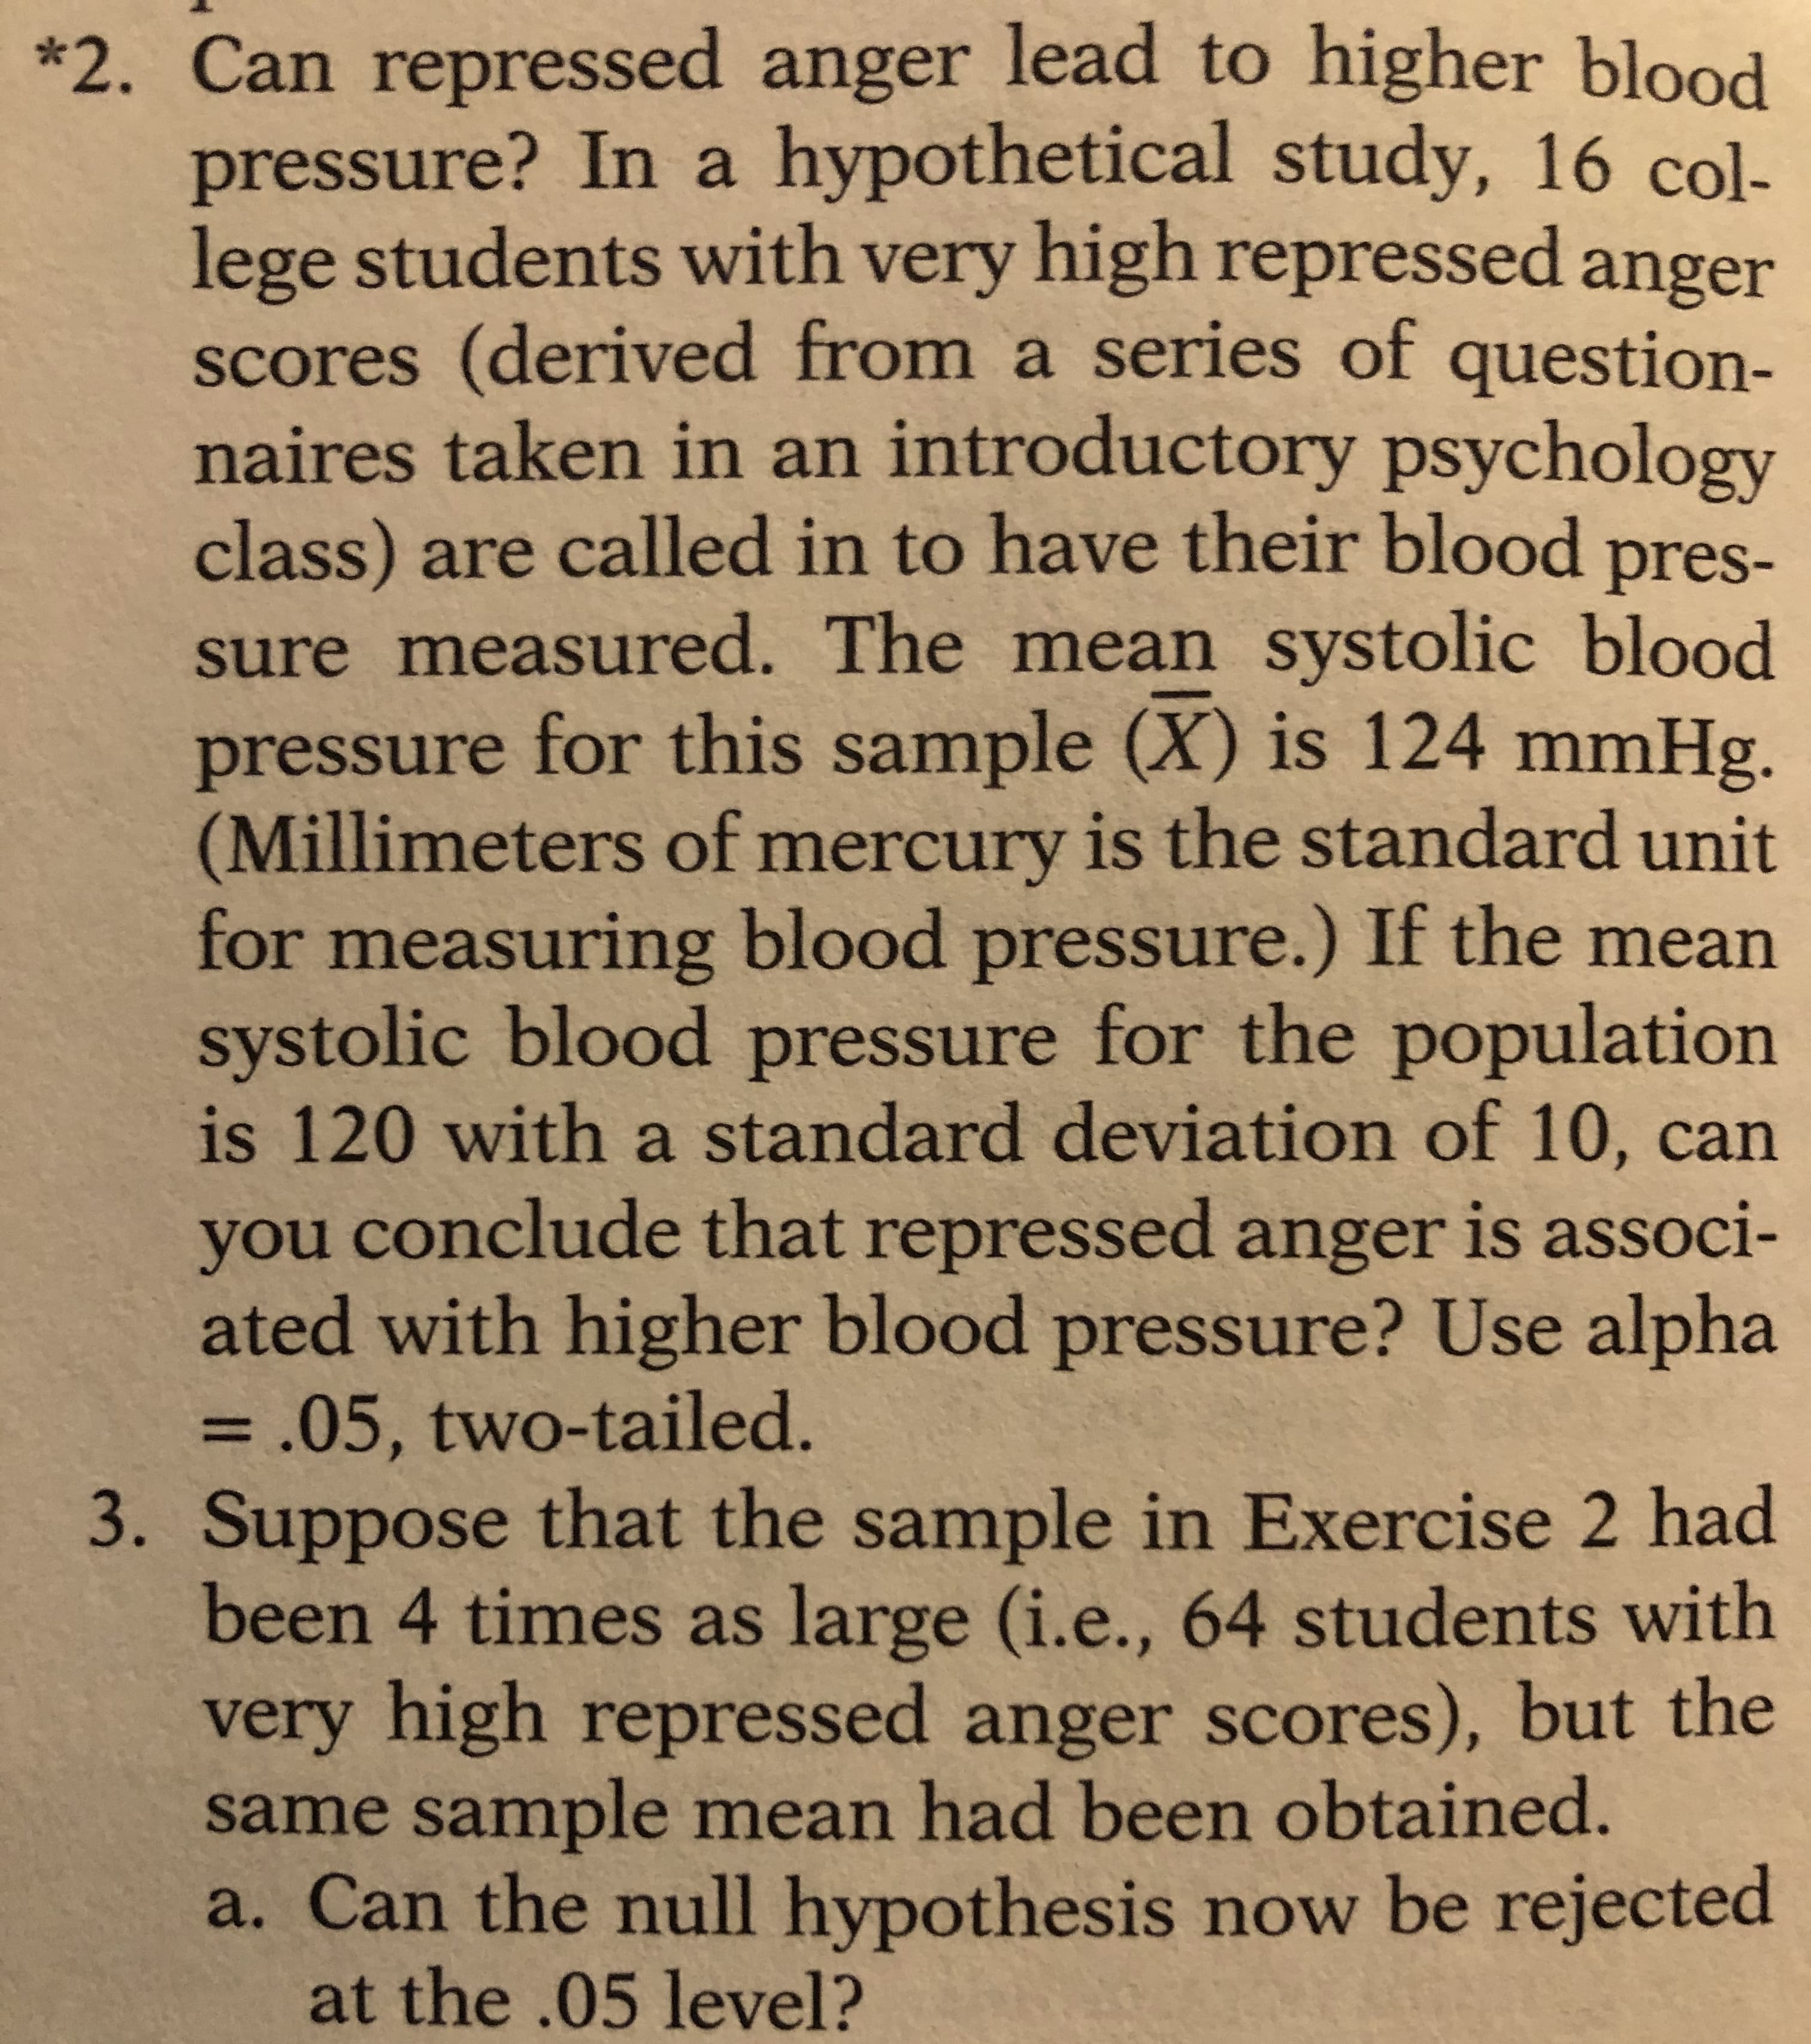 Suppose that the sample in Exercise 2 had
been 4 times as large (i.e., 64 students with
very high repressed anger scores), but the
same sample mean had been obtained.
a. Can the null hypothesis now be rejected
at the .05 level?
